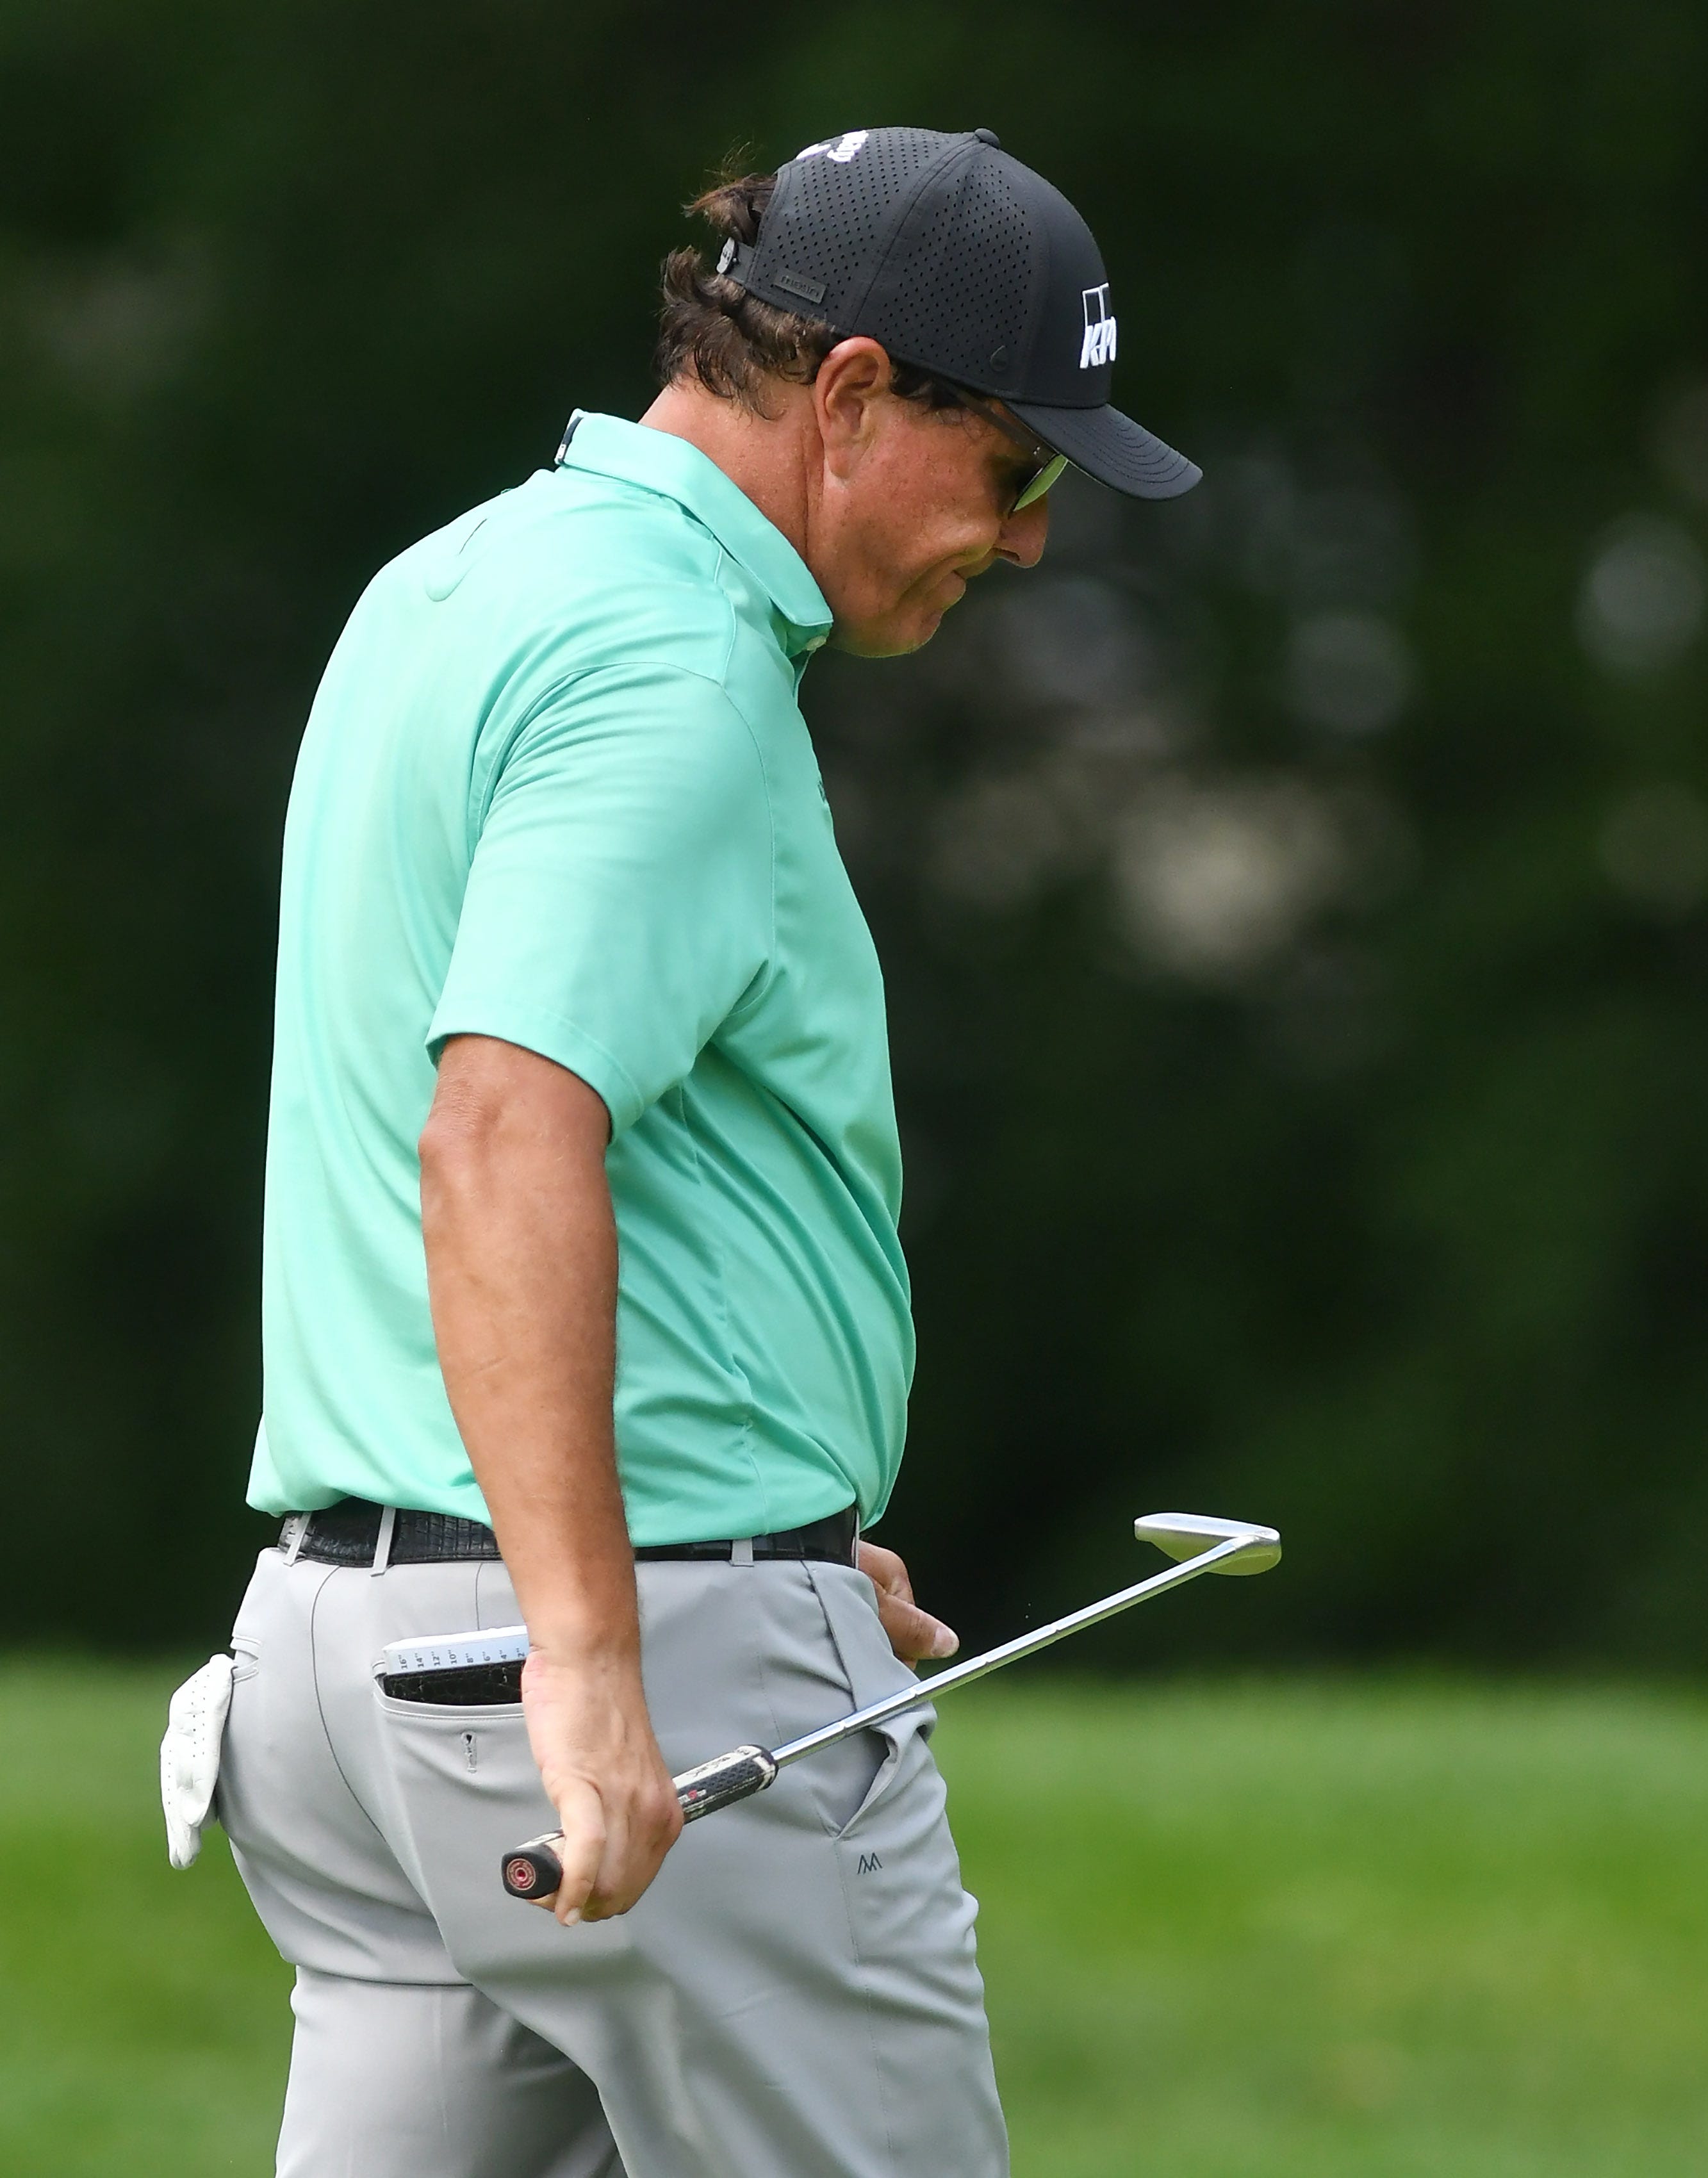 Phil Mickelson reacts after missing a putt on the ninth green.